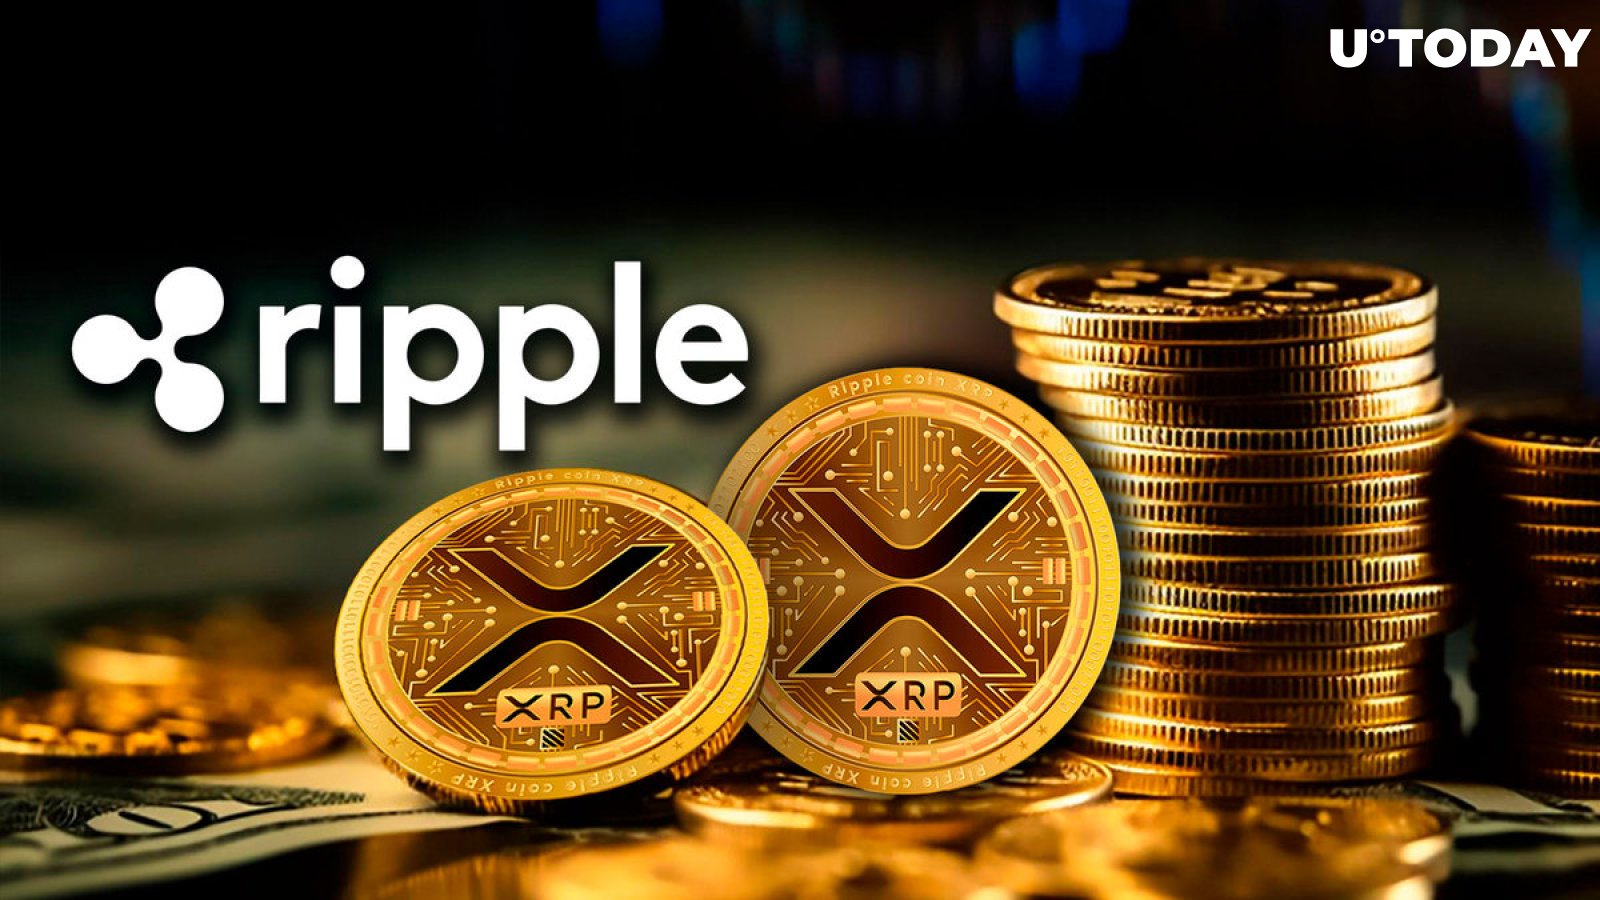 Flash Payments | The difference between Ripple and XRP